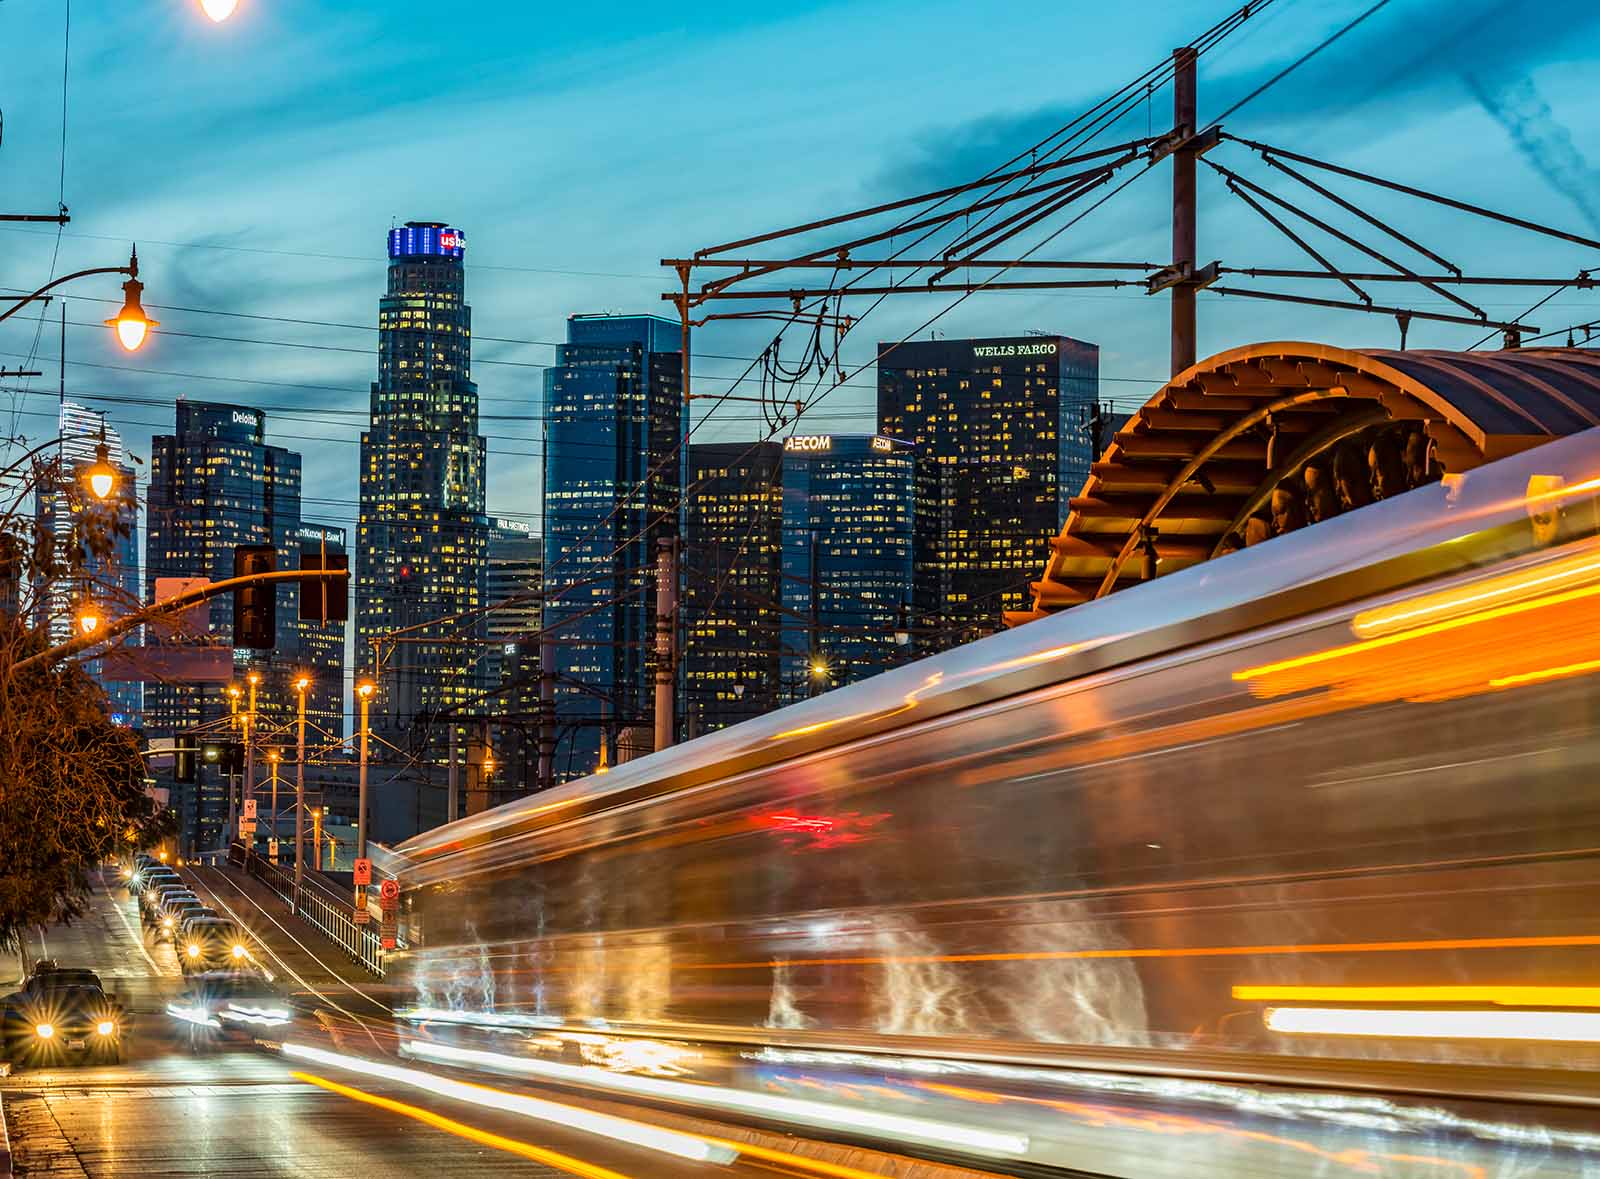 Photograph of LA traffic, with blurred train zooming by.